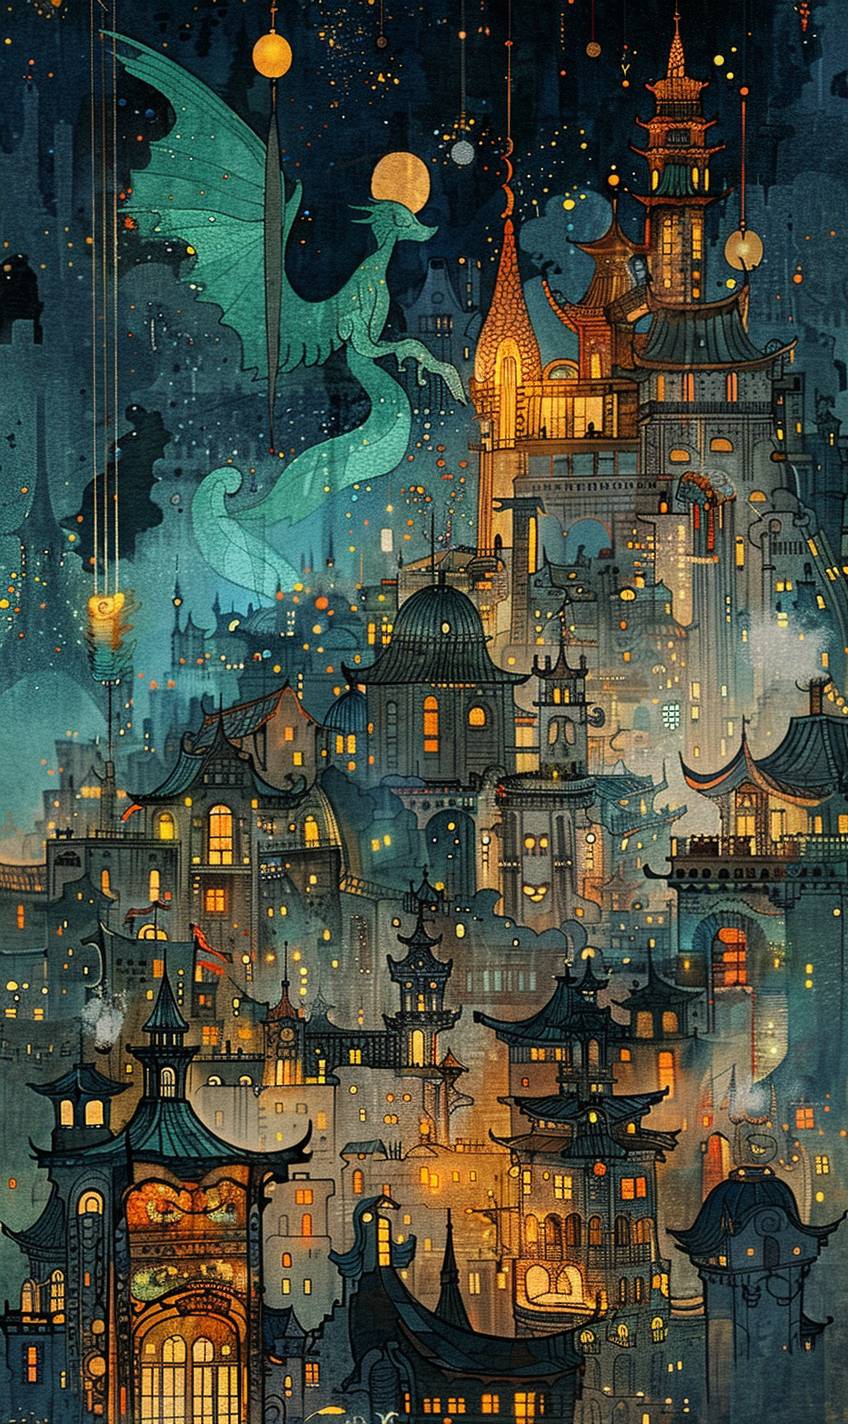 Art Nouveau, Anderson's fairy tale illustration, stylish city with bright lights, mysterious and dreamy, extremely sophisticated